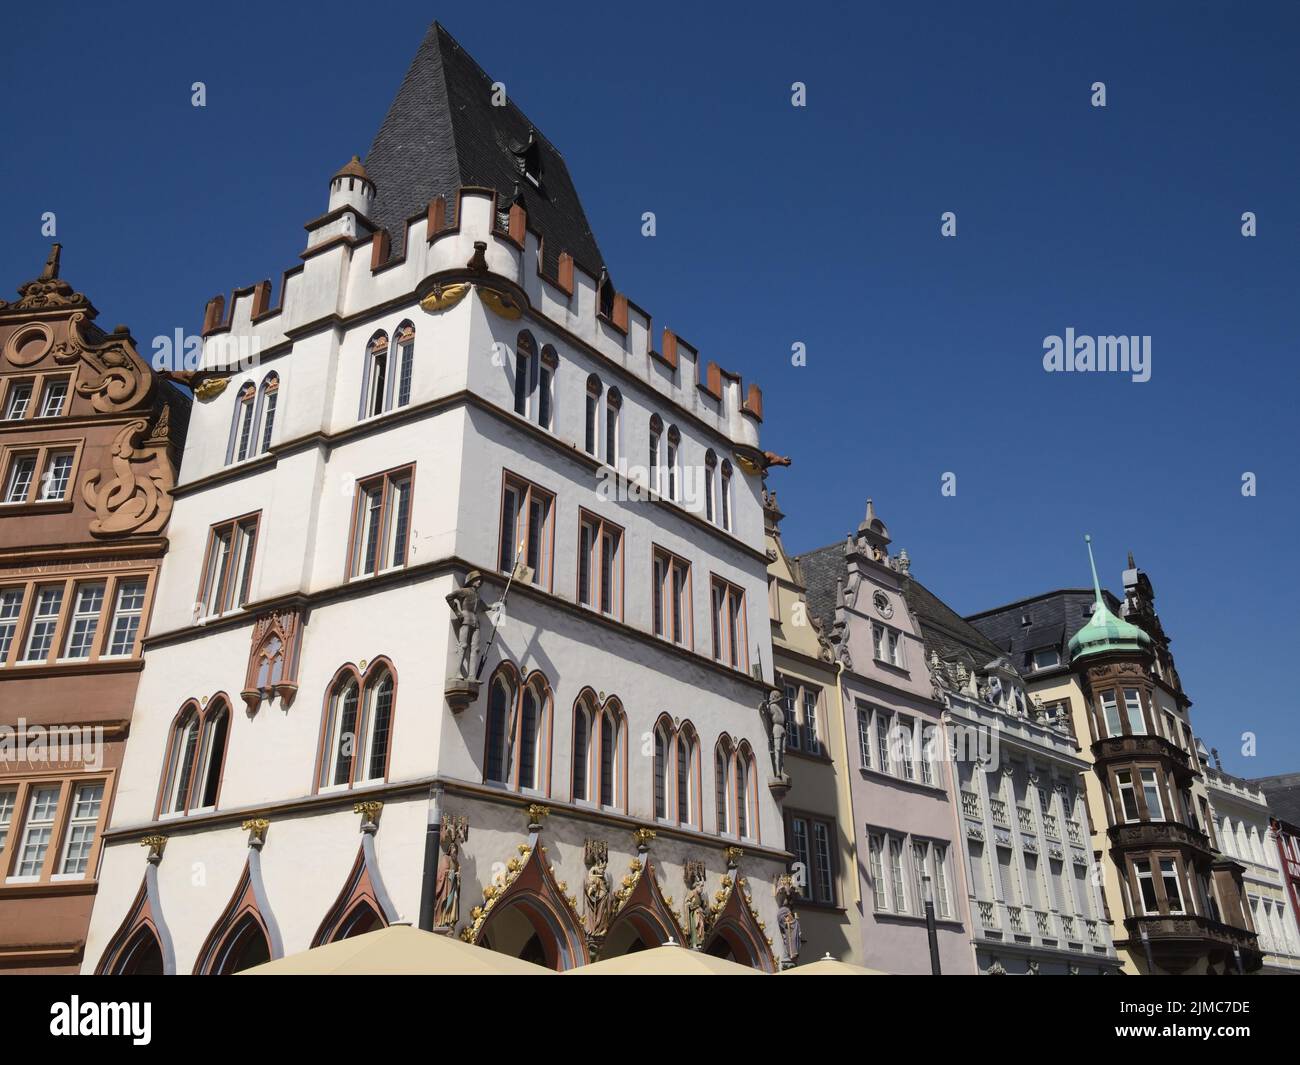 Trier - Houses on the Main Market, Germany Stock Photo